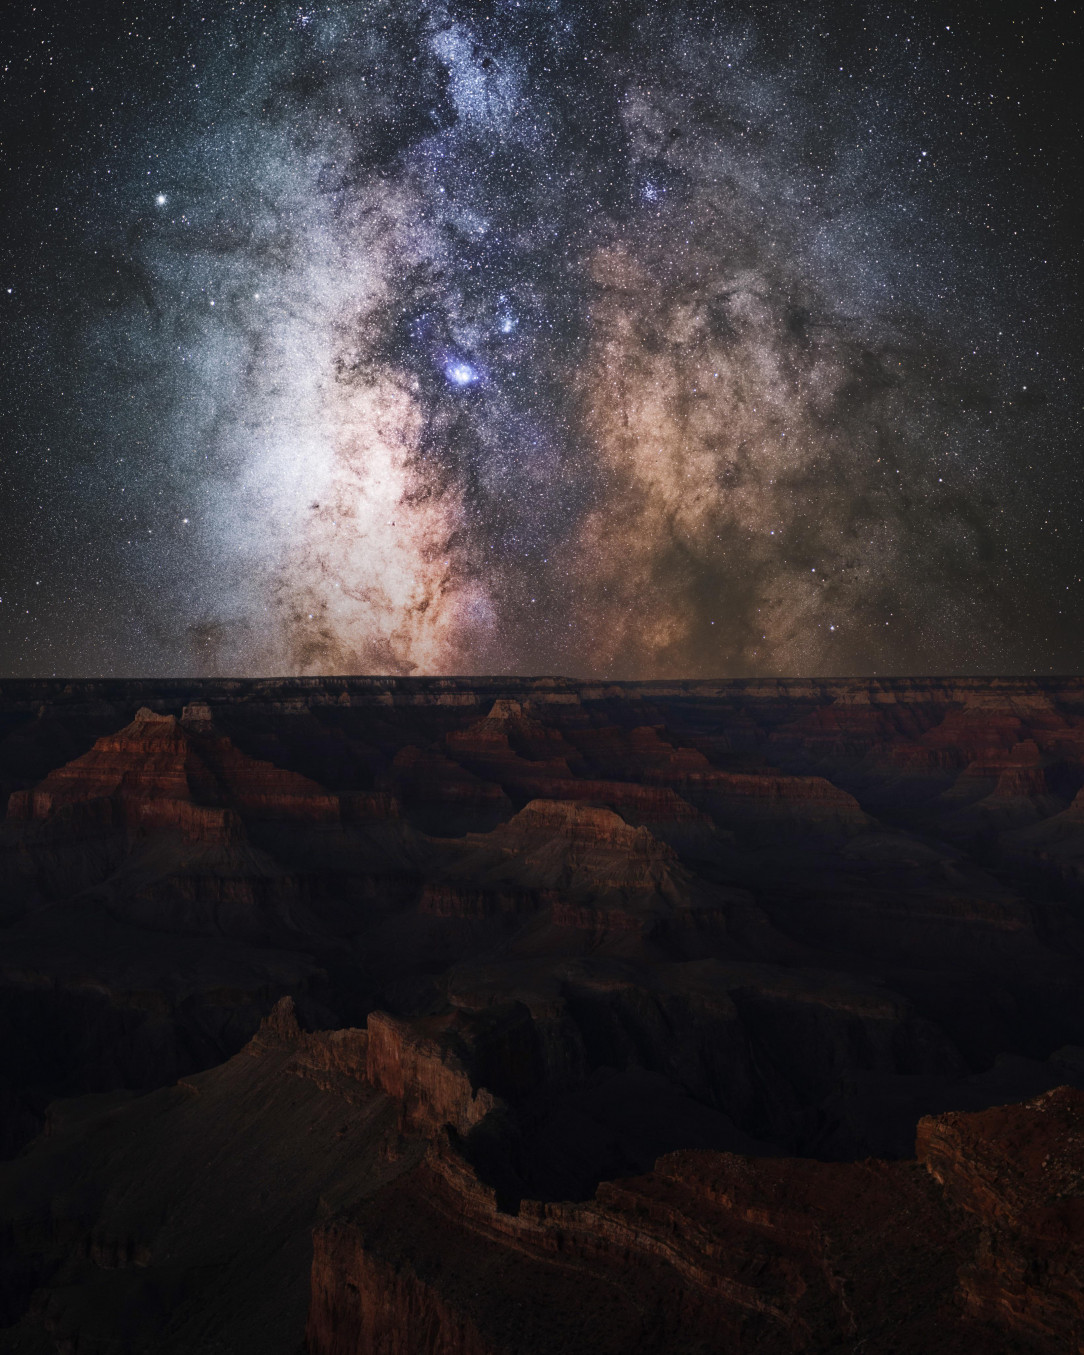 Took a picture of Milky Way over Grand Canyon